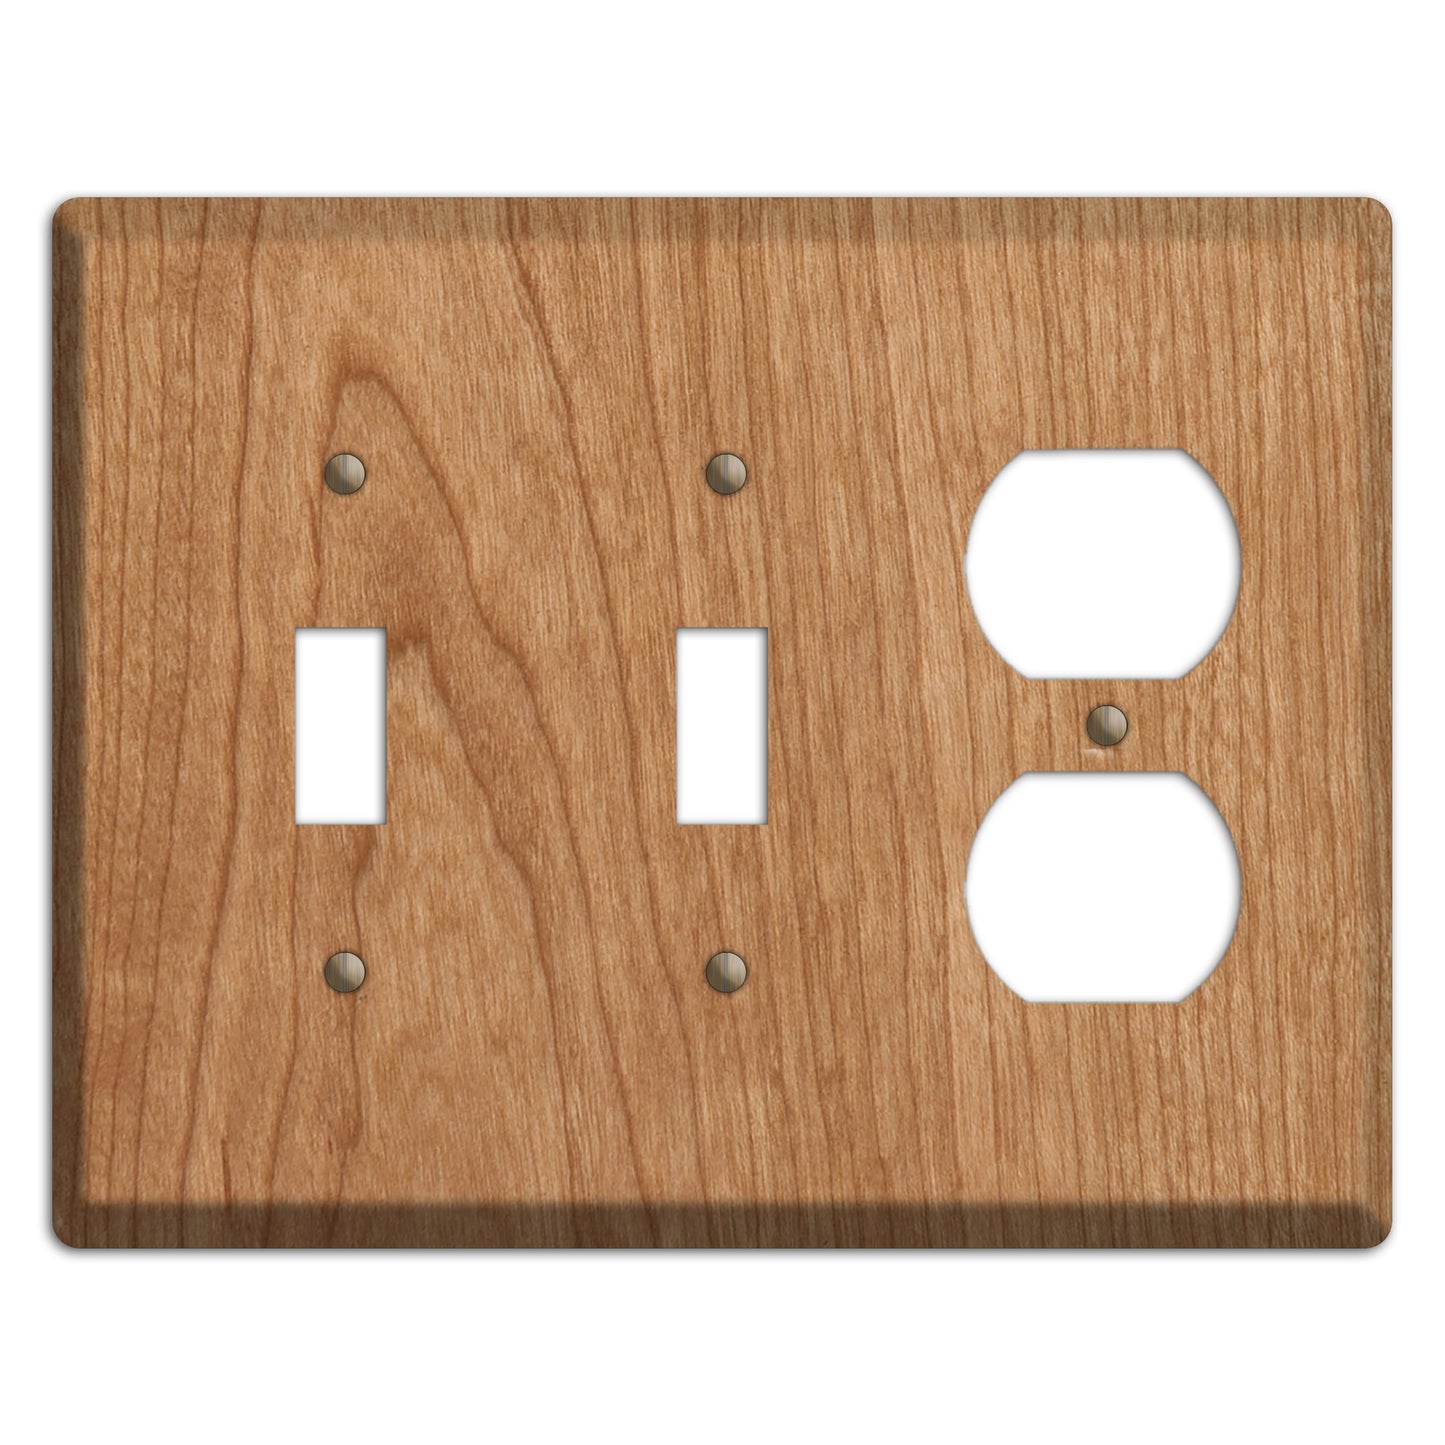 Unfinished Cherry Wood 2 Toggle / Duplex Outlet Cover Plate